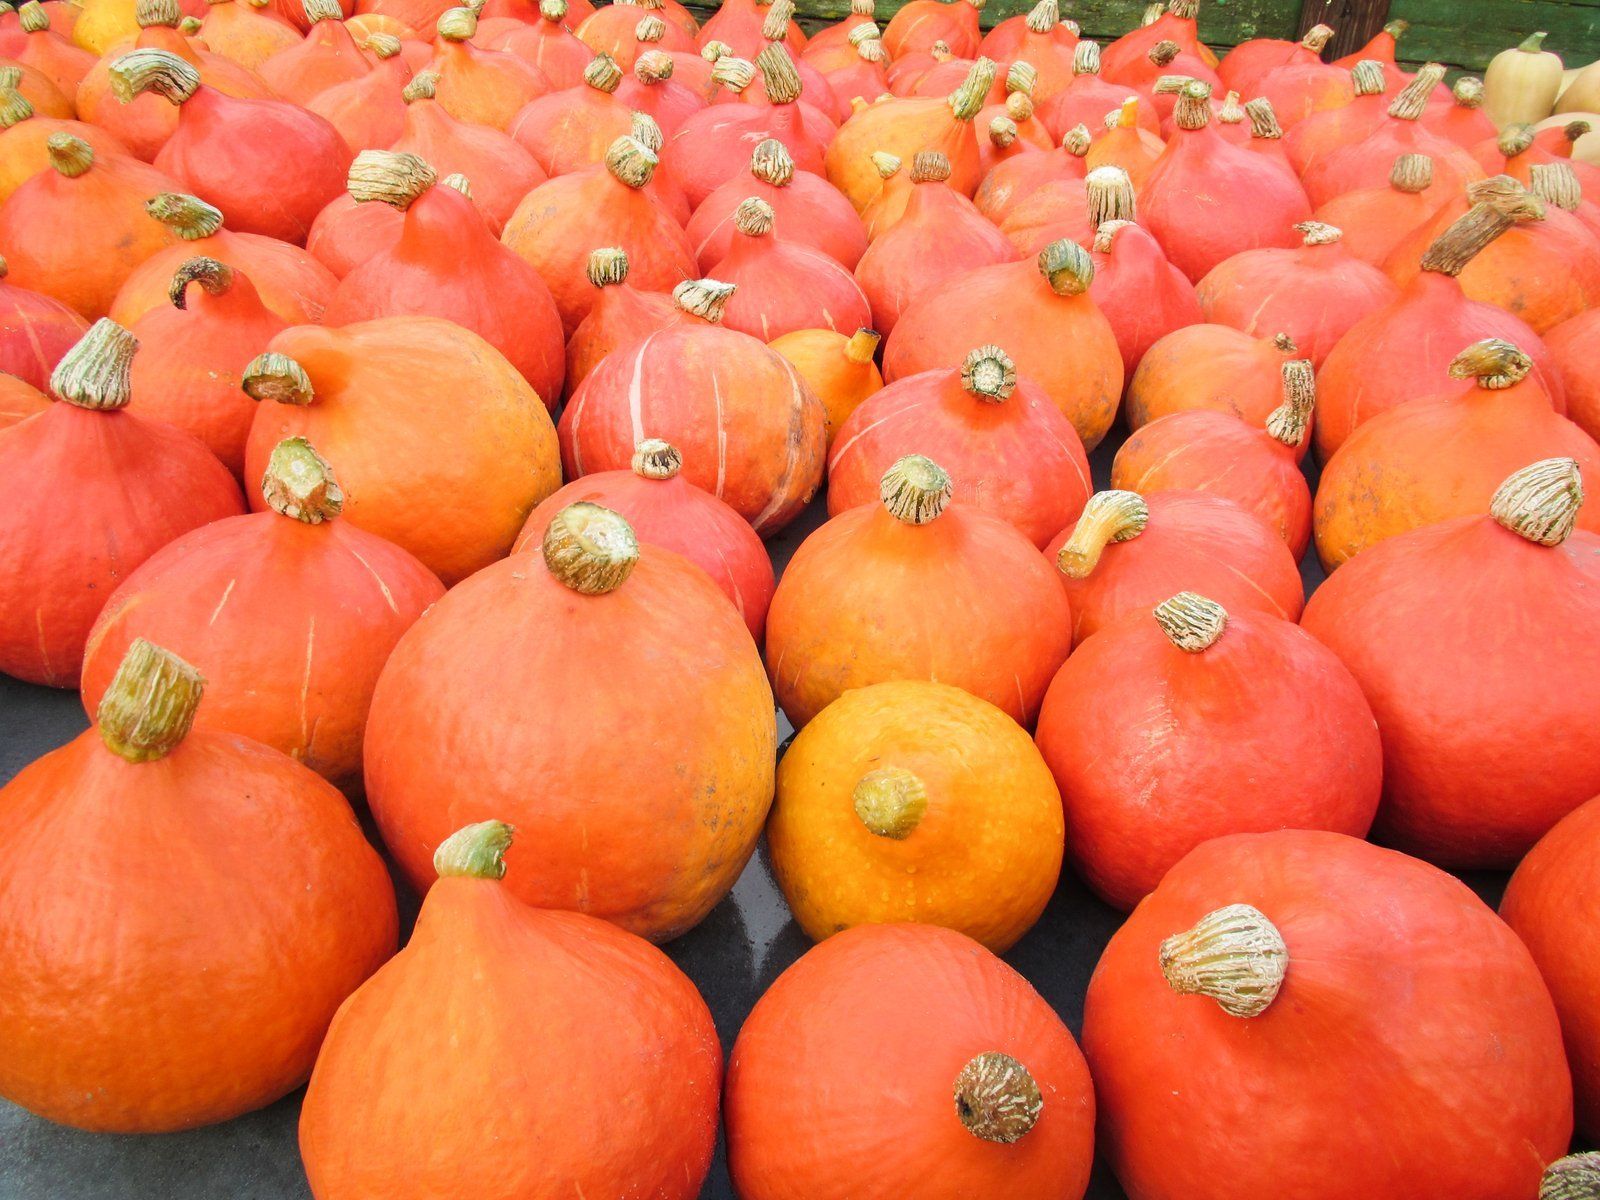 Previous Happening: Red Kuri Winter Squash and Ribeye Steaks Available The Week!